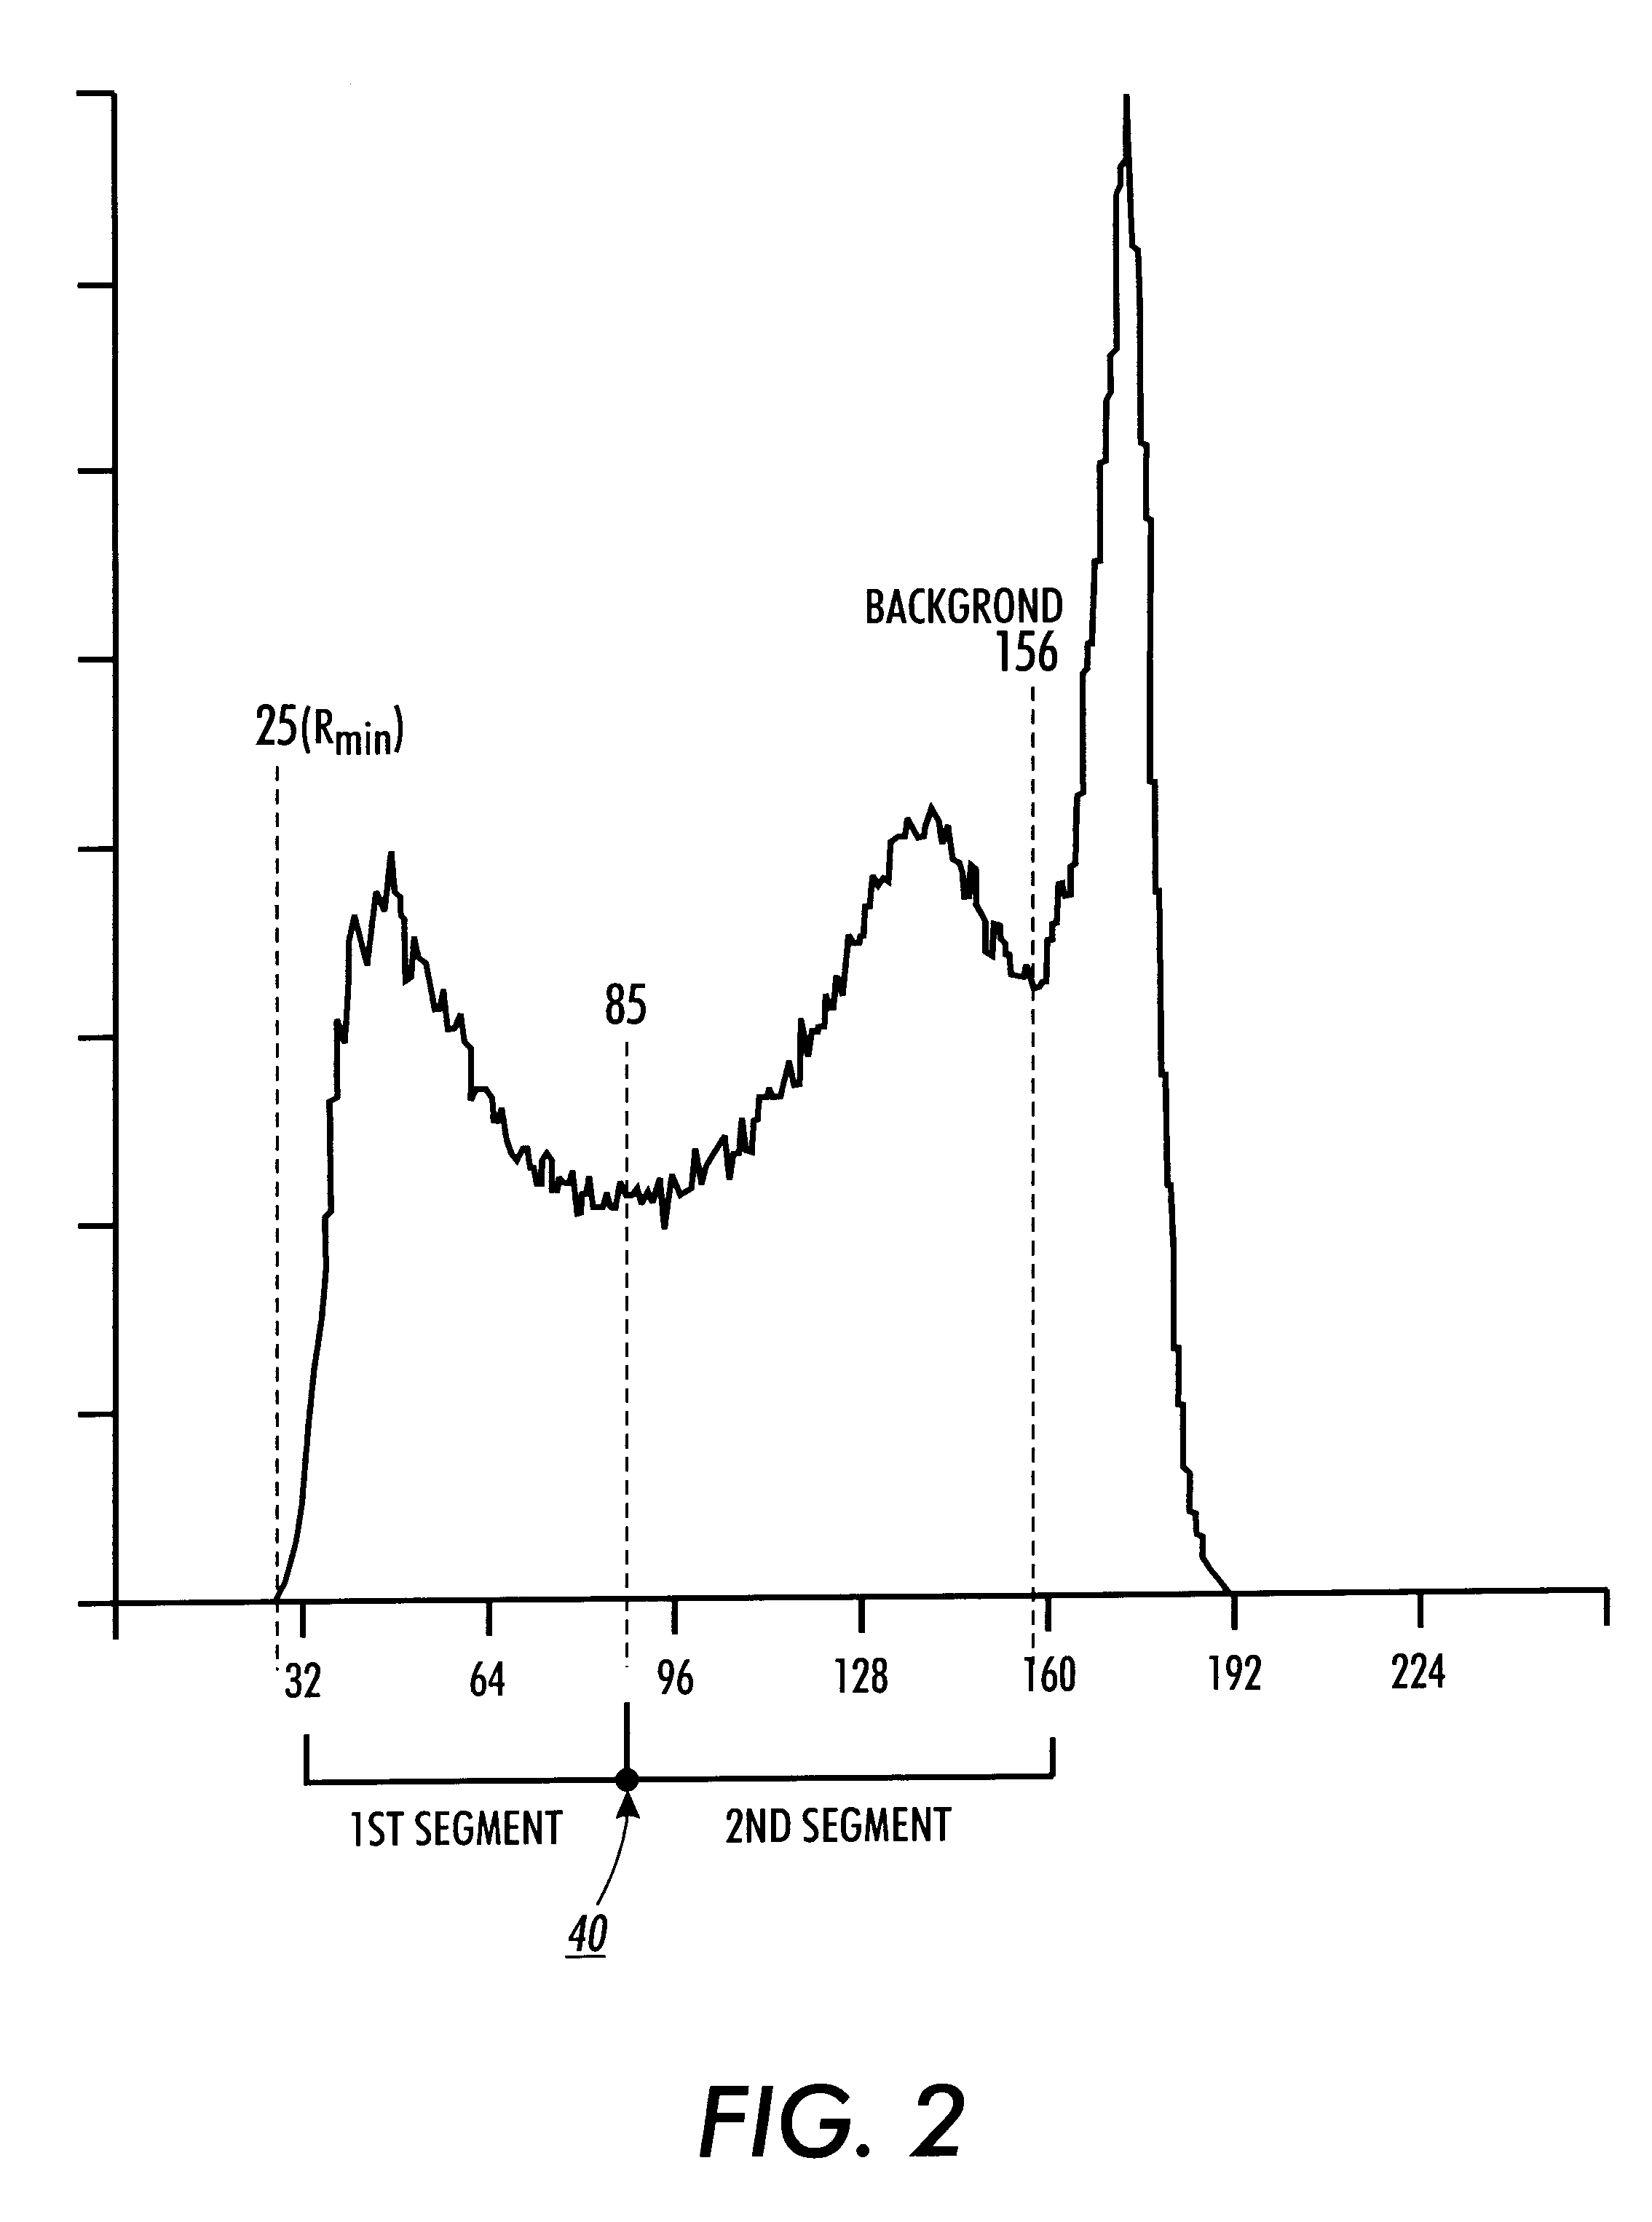 Automatic method for determining piecewise linear transformation from an image histogram